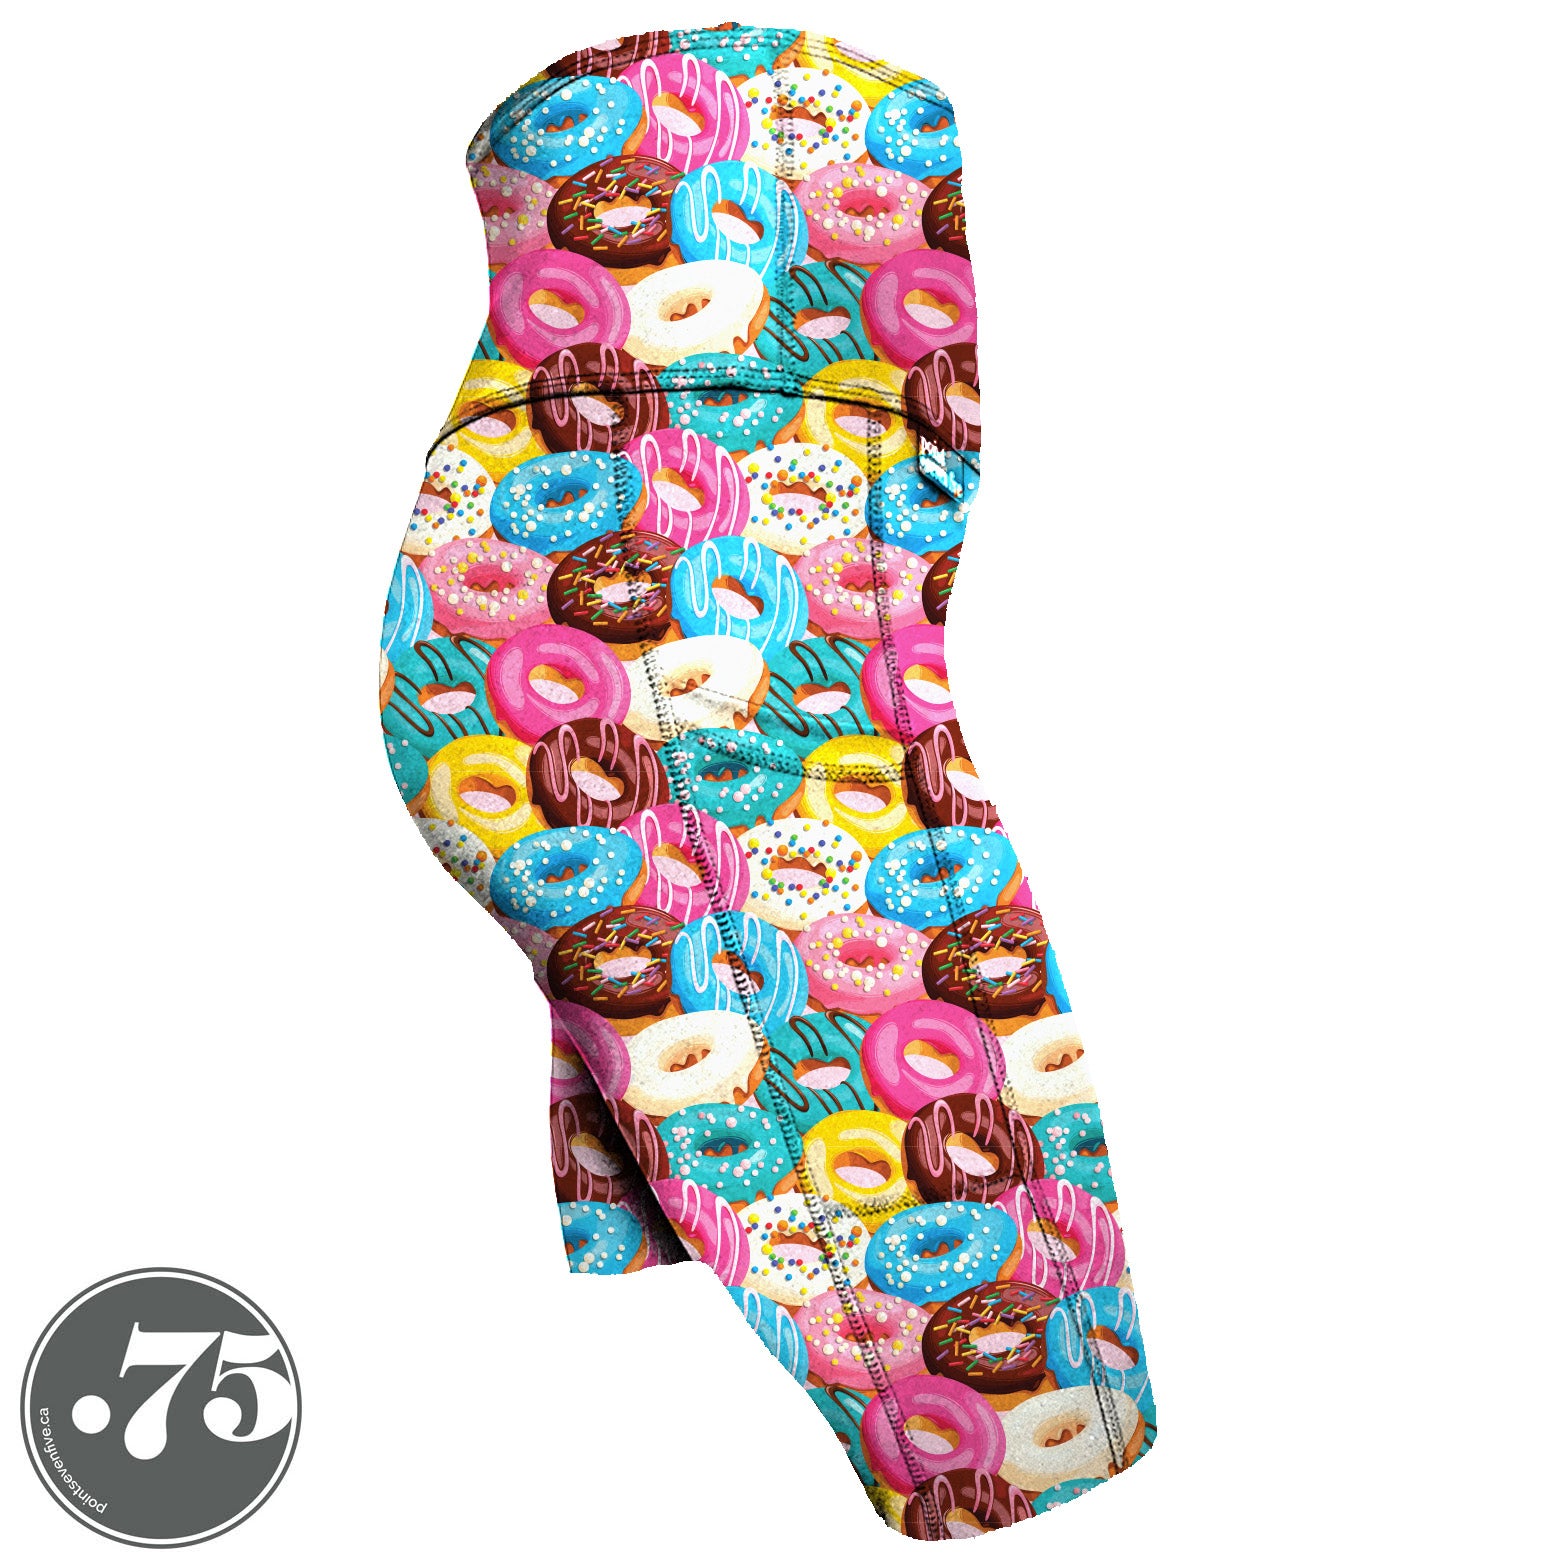 High-waisted, spandex Knee Length pocket shorts. The fabric is illustrated donuts with icing in pastel shades of blue, aqua, pink, yellow, white and brown.